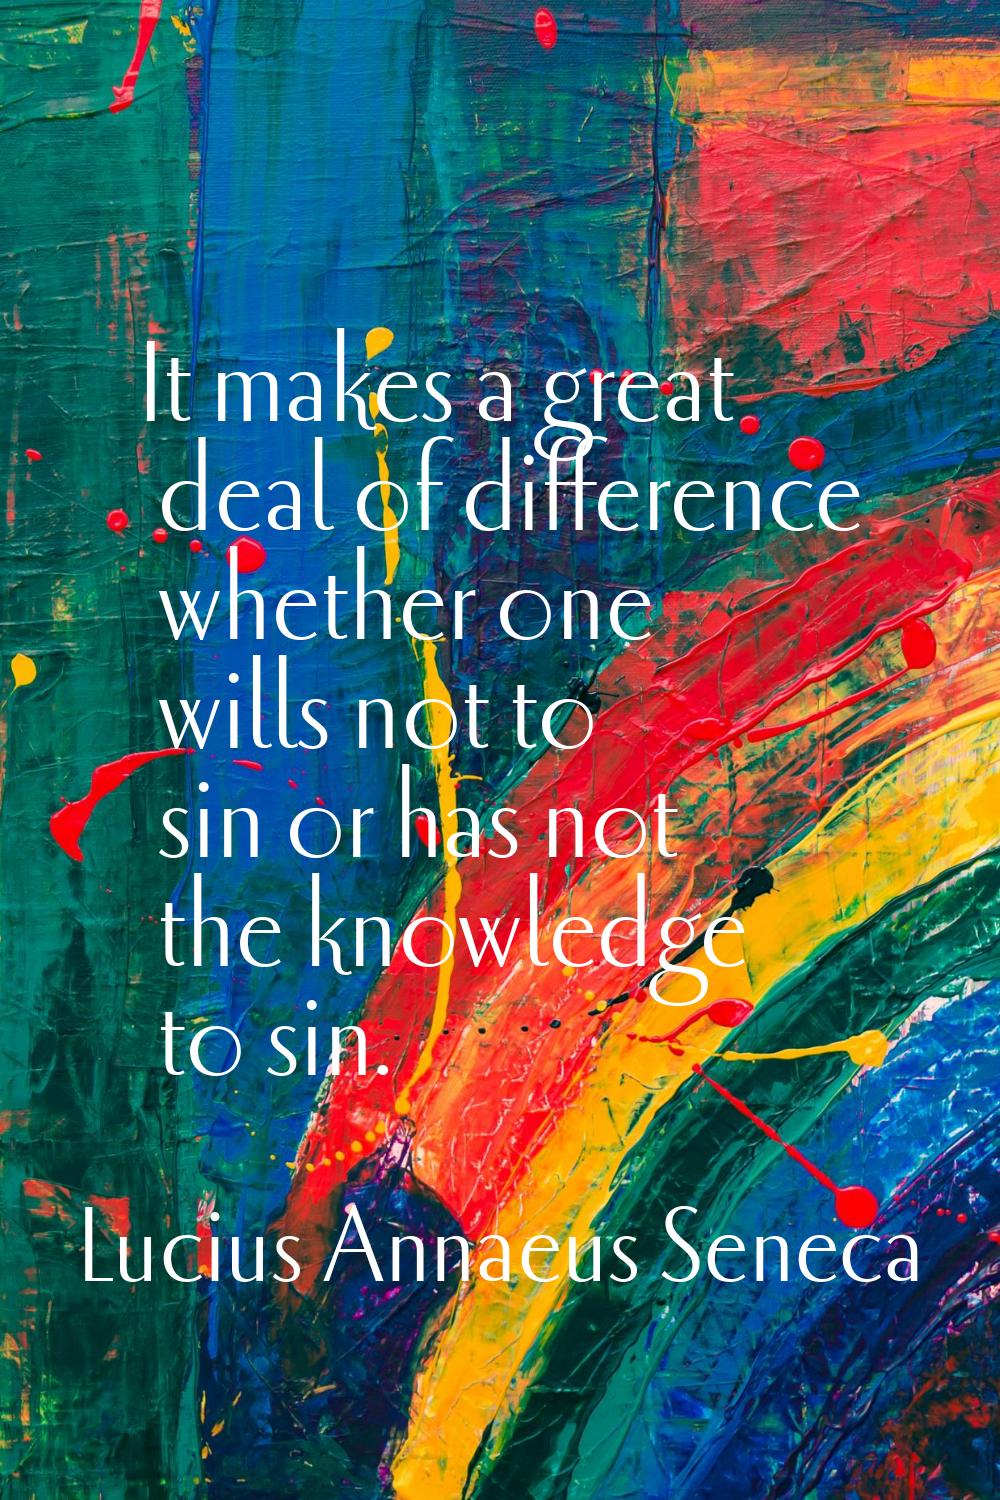 It makes a great deal of difference whether one wills not to sin or has not the knowledge to sin.